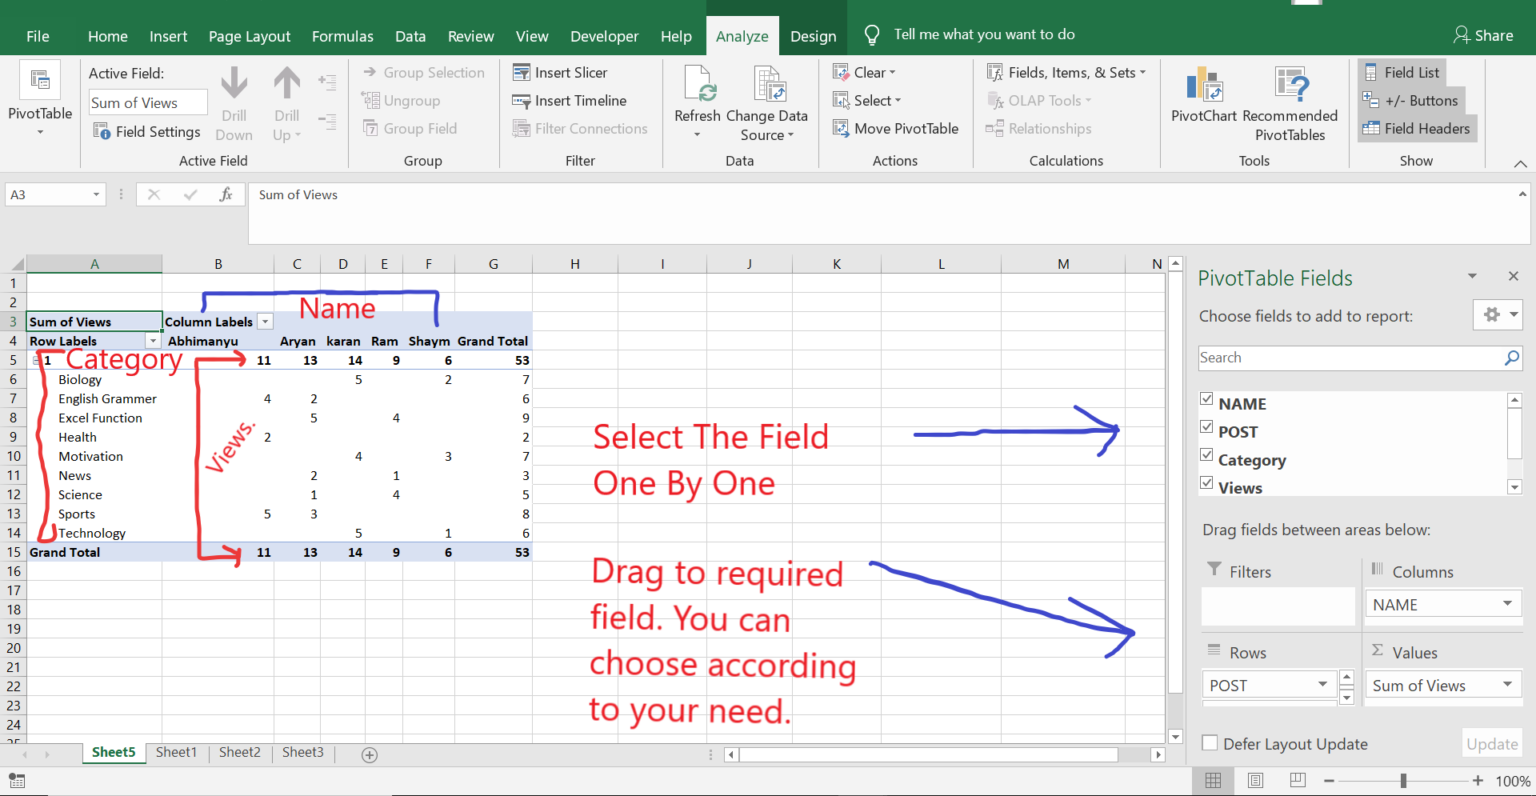 transpose button in excel does what